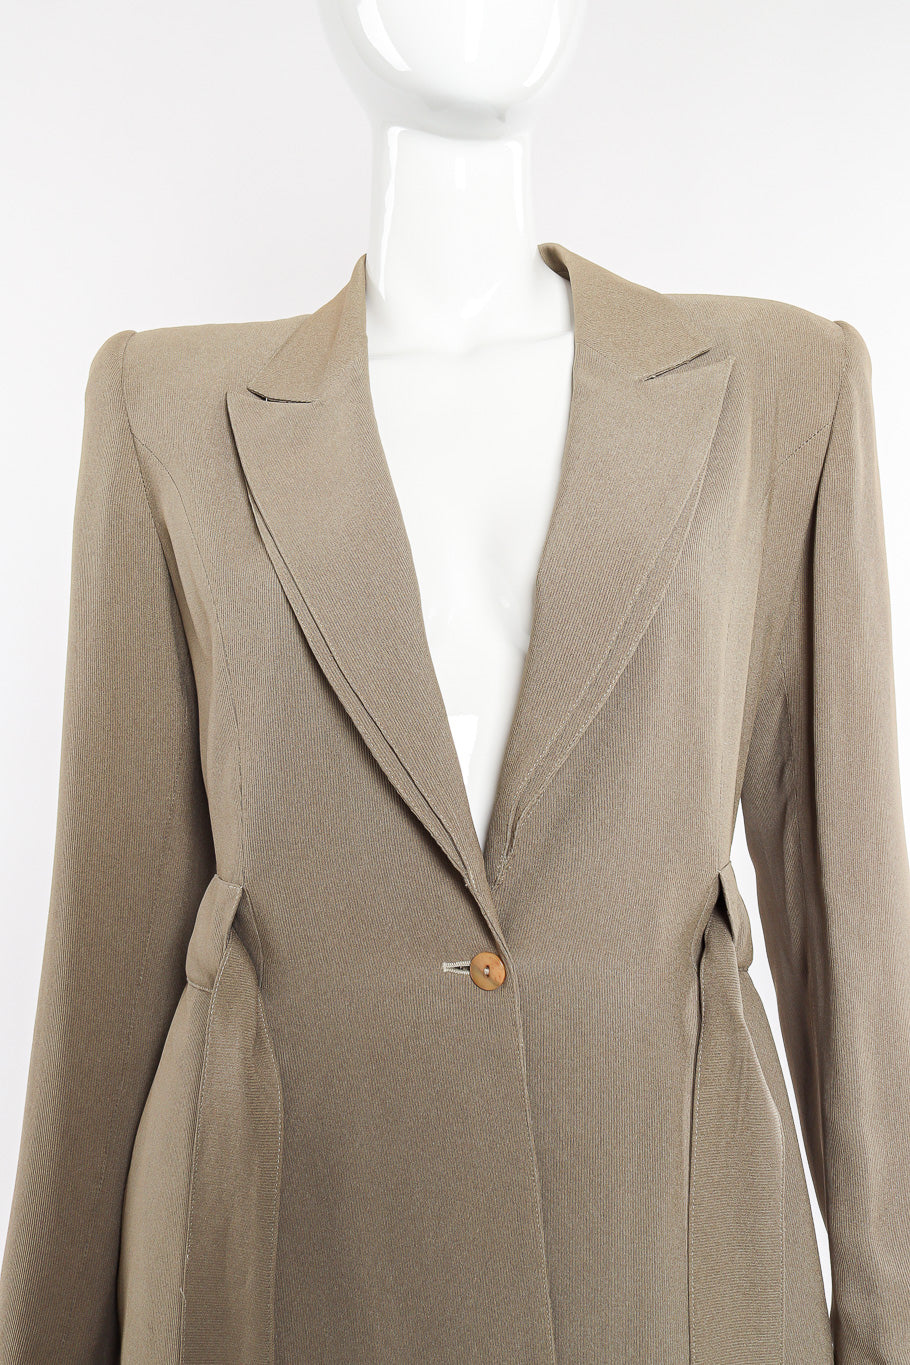  Jacket and pant suit set by State of Claude Montana on mannequin close jacket untied @recessla